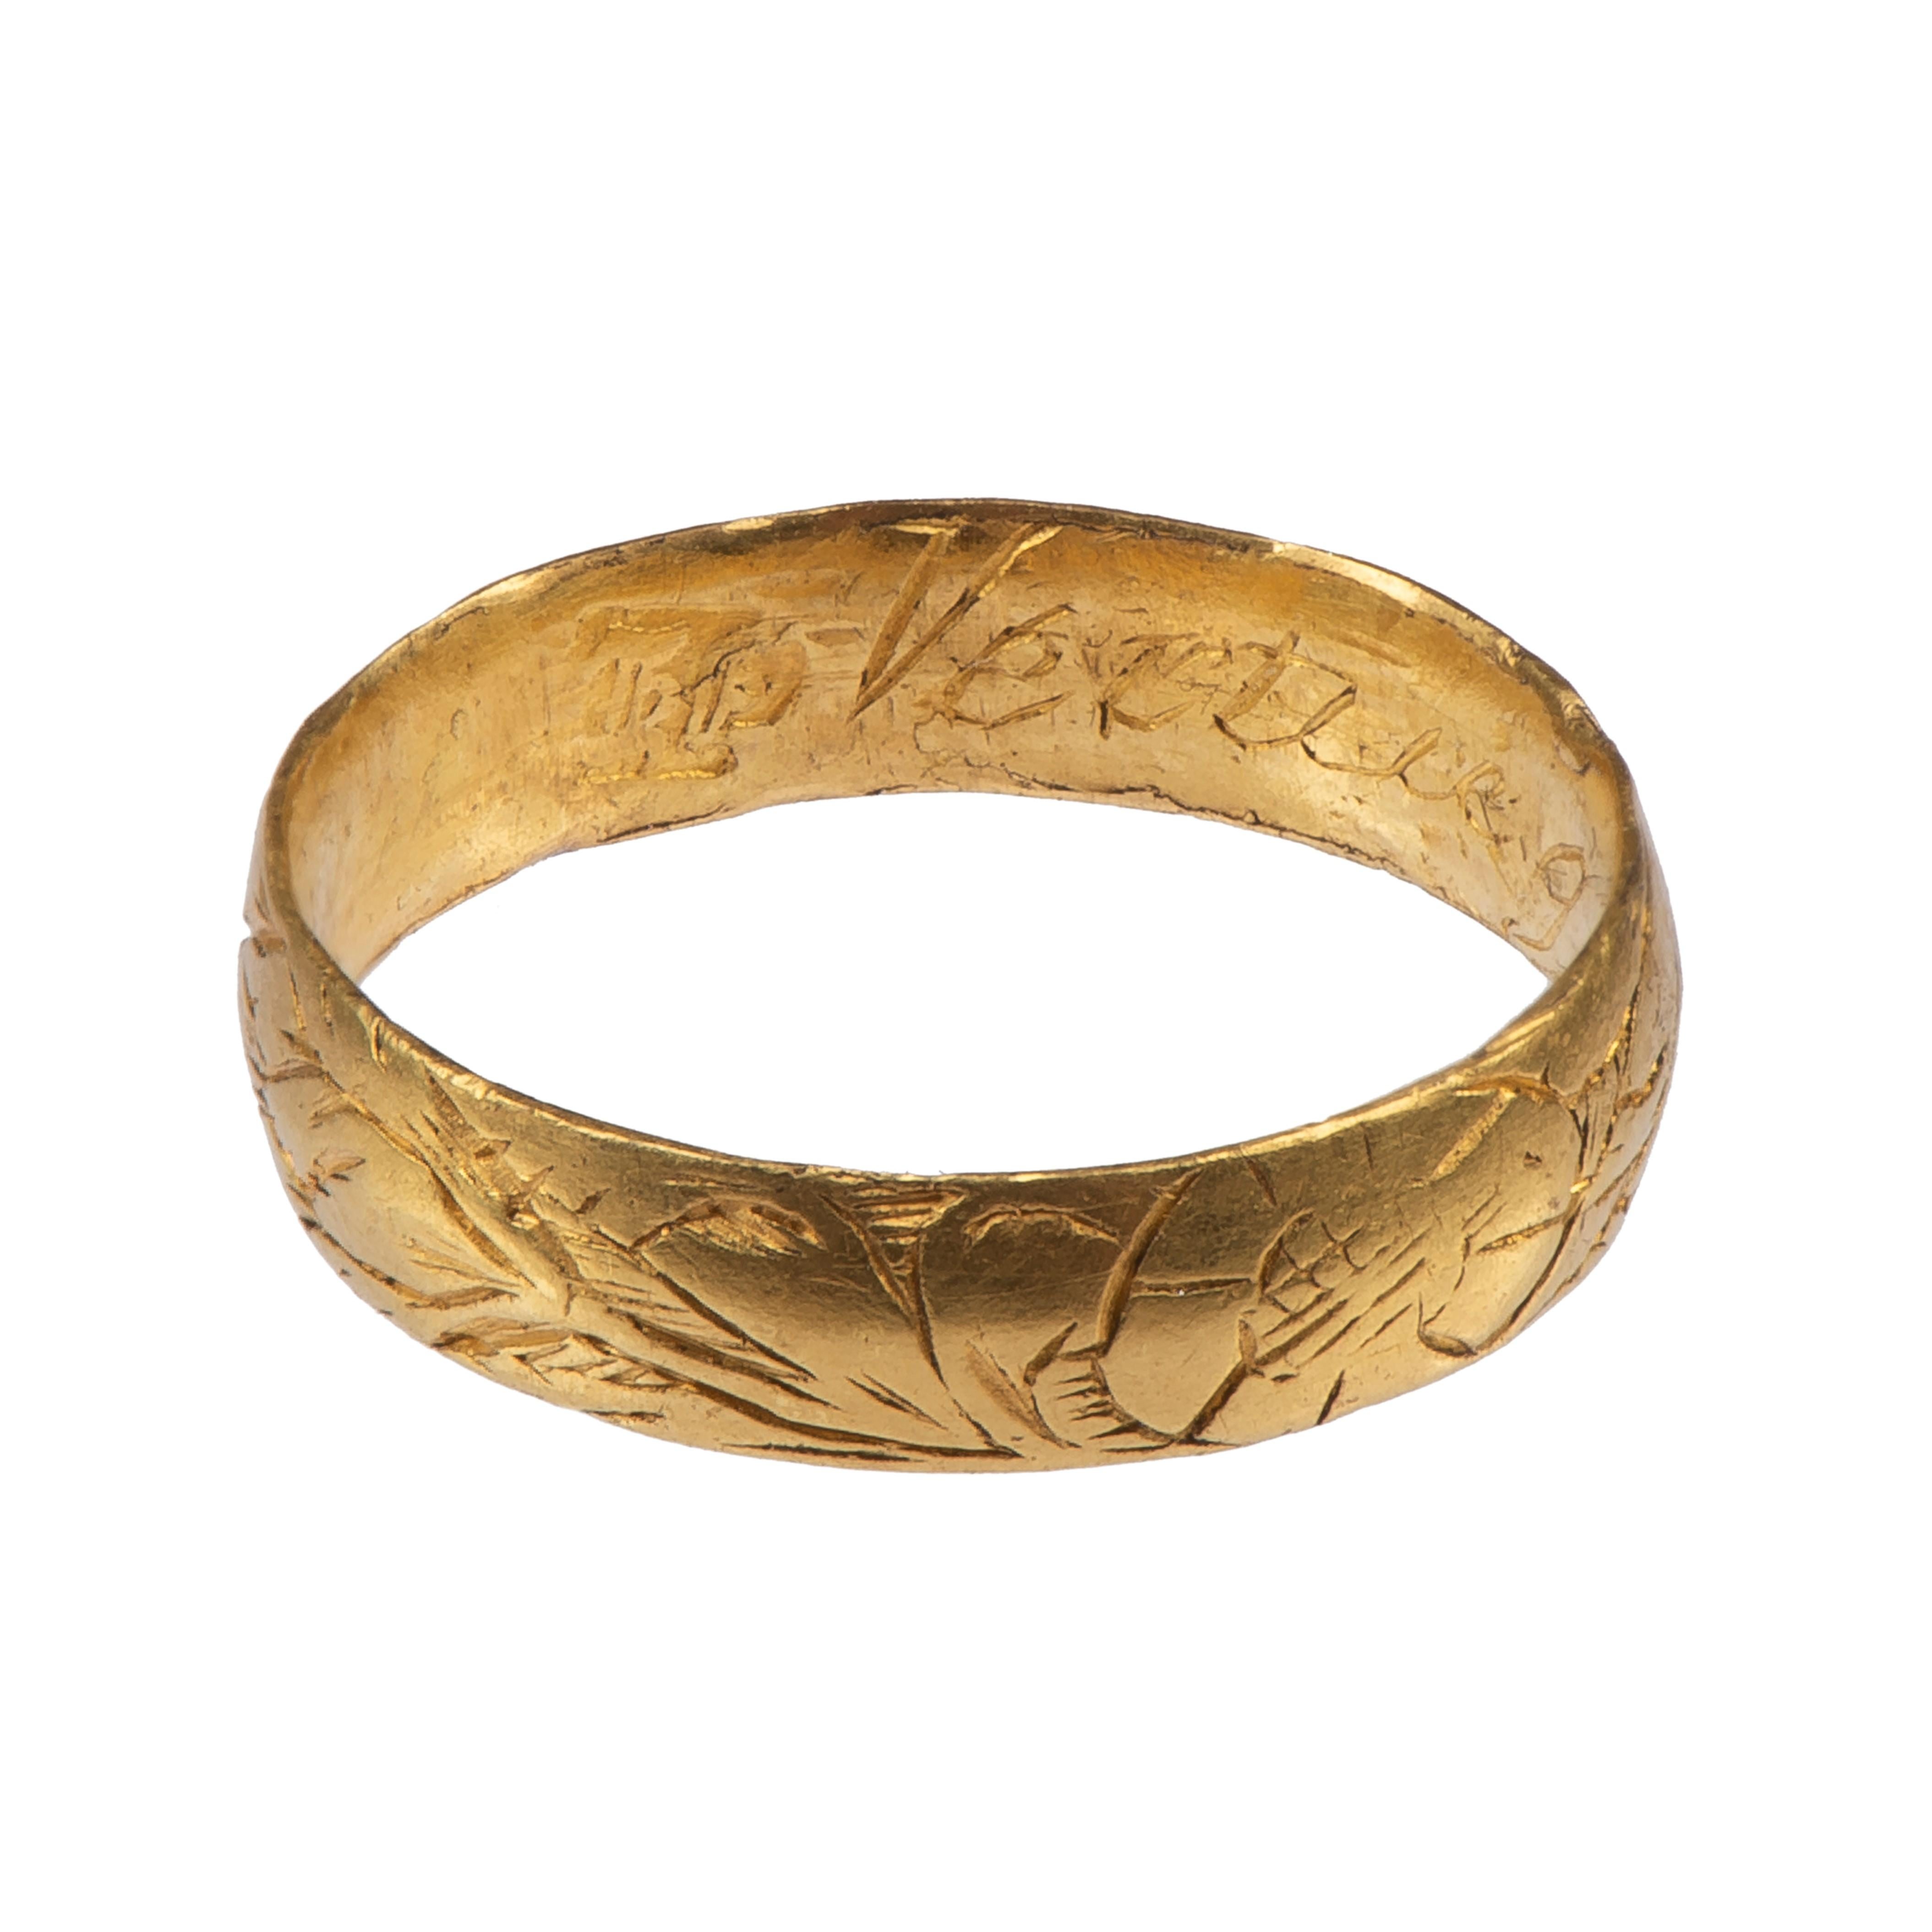 Posy Ring ‘Vertue Gaineth Glory’
England, c. 1700
Gold
Weight 2 gr.; circumference 46.68 mm.; US size 4; UK size H ½

Posy ring featuring floral decoration including daisies and tulips. 
Wide gold band, plain on the interior with engraved English